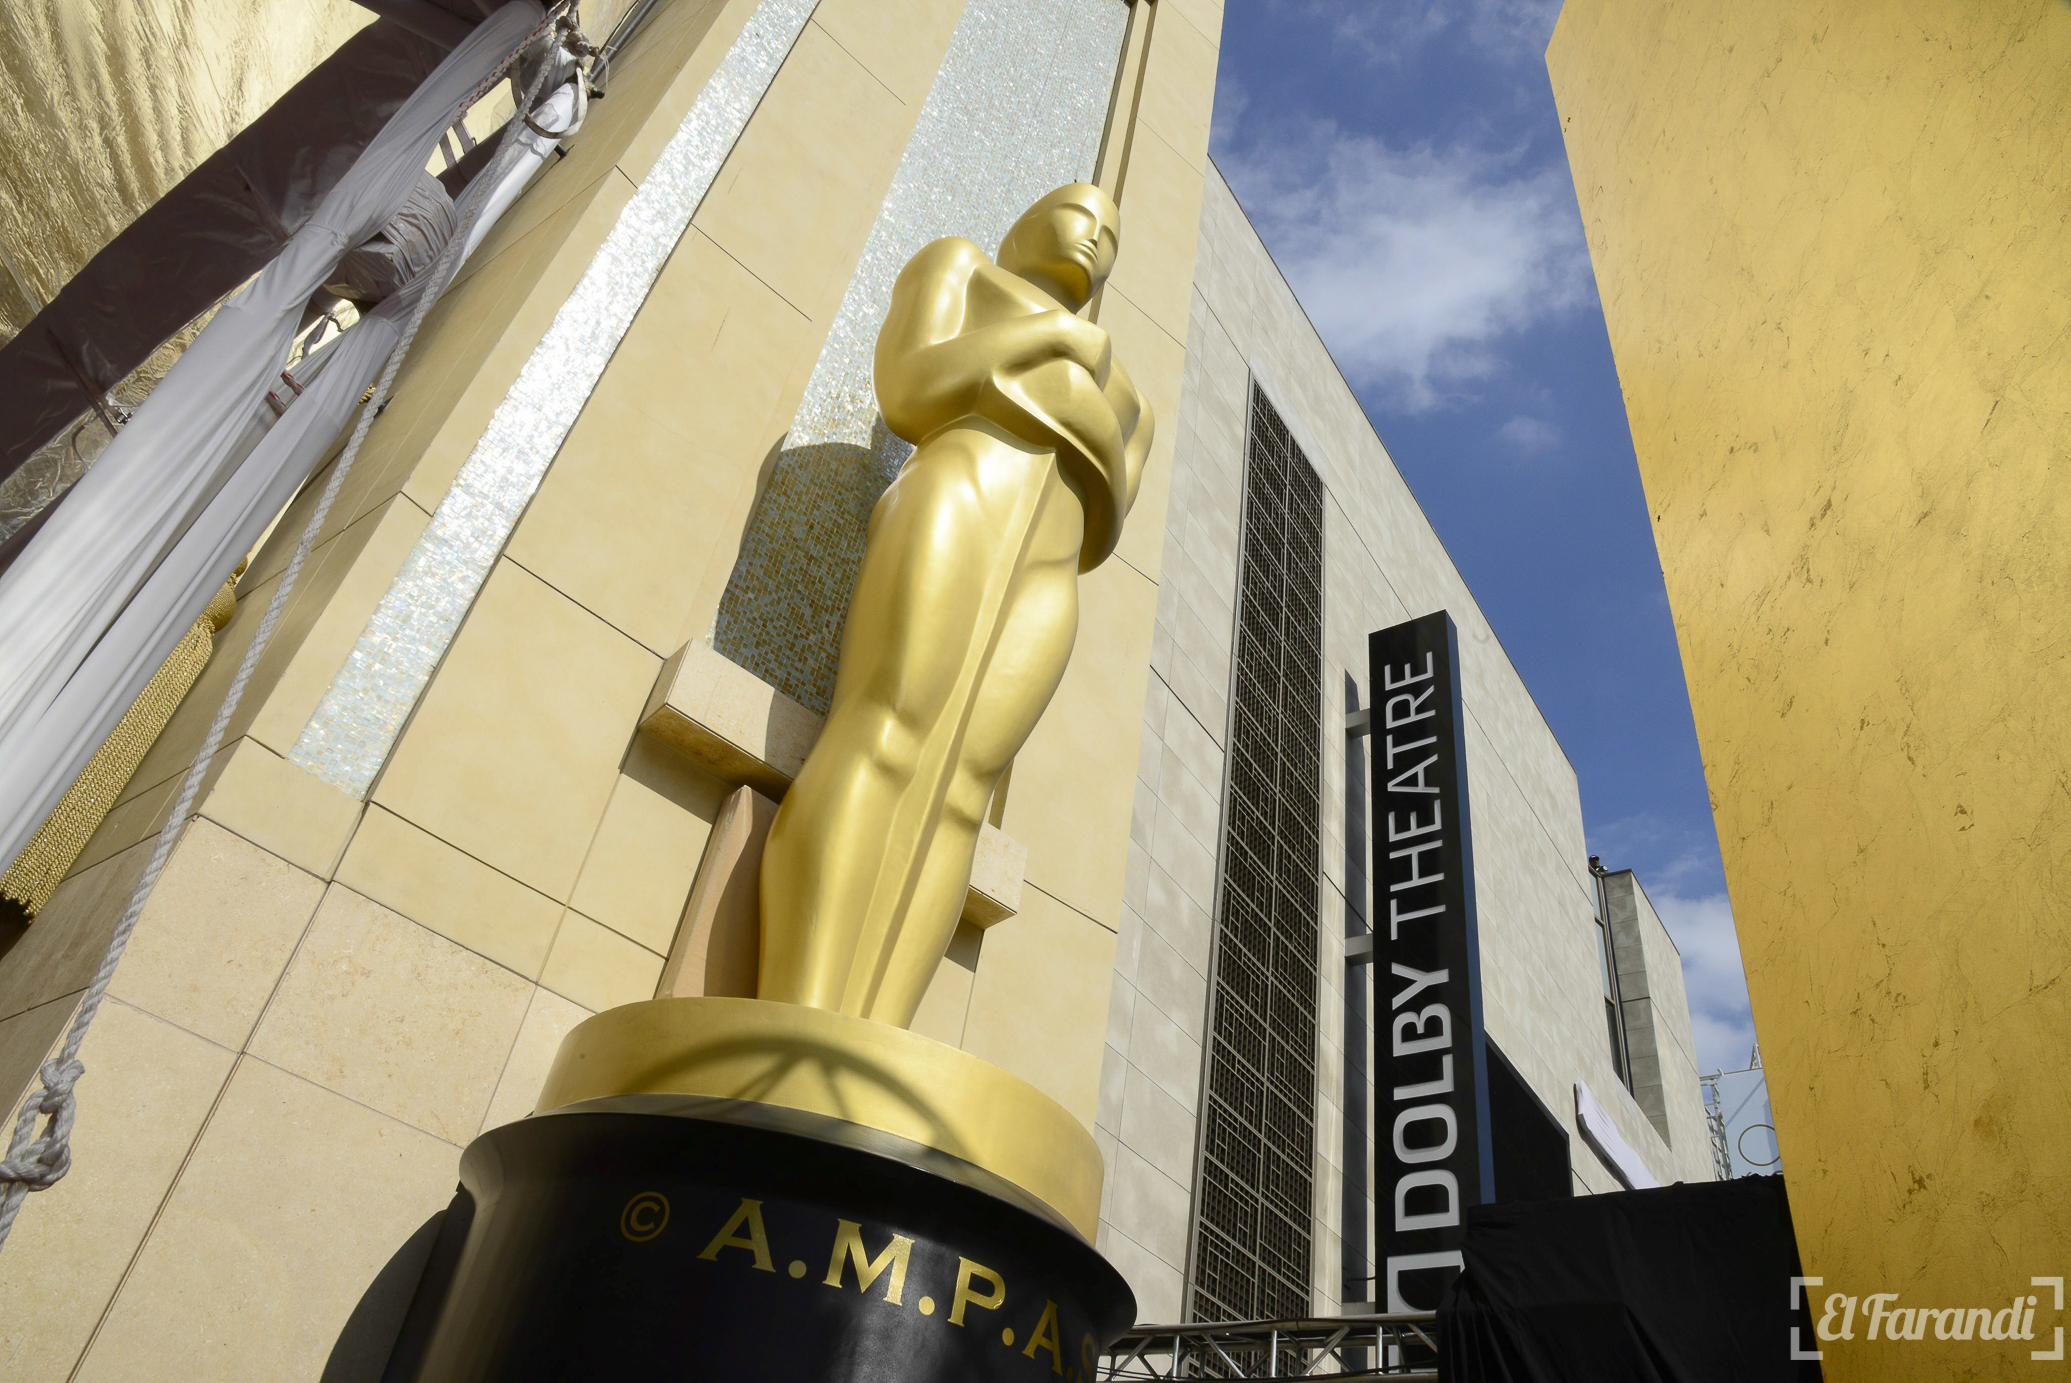 Preparations for 87th Academy Awards